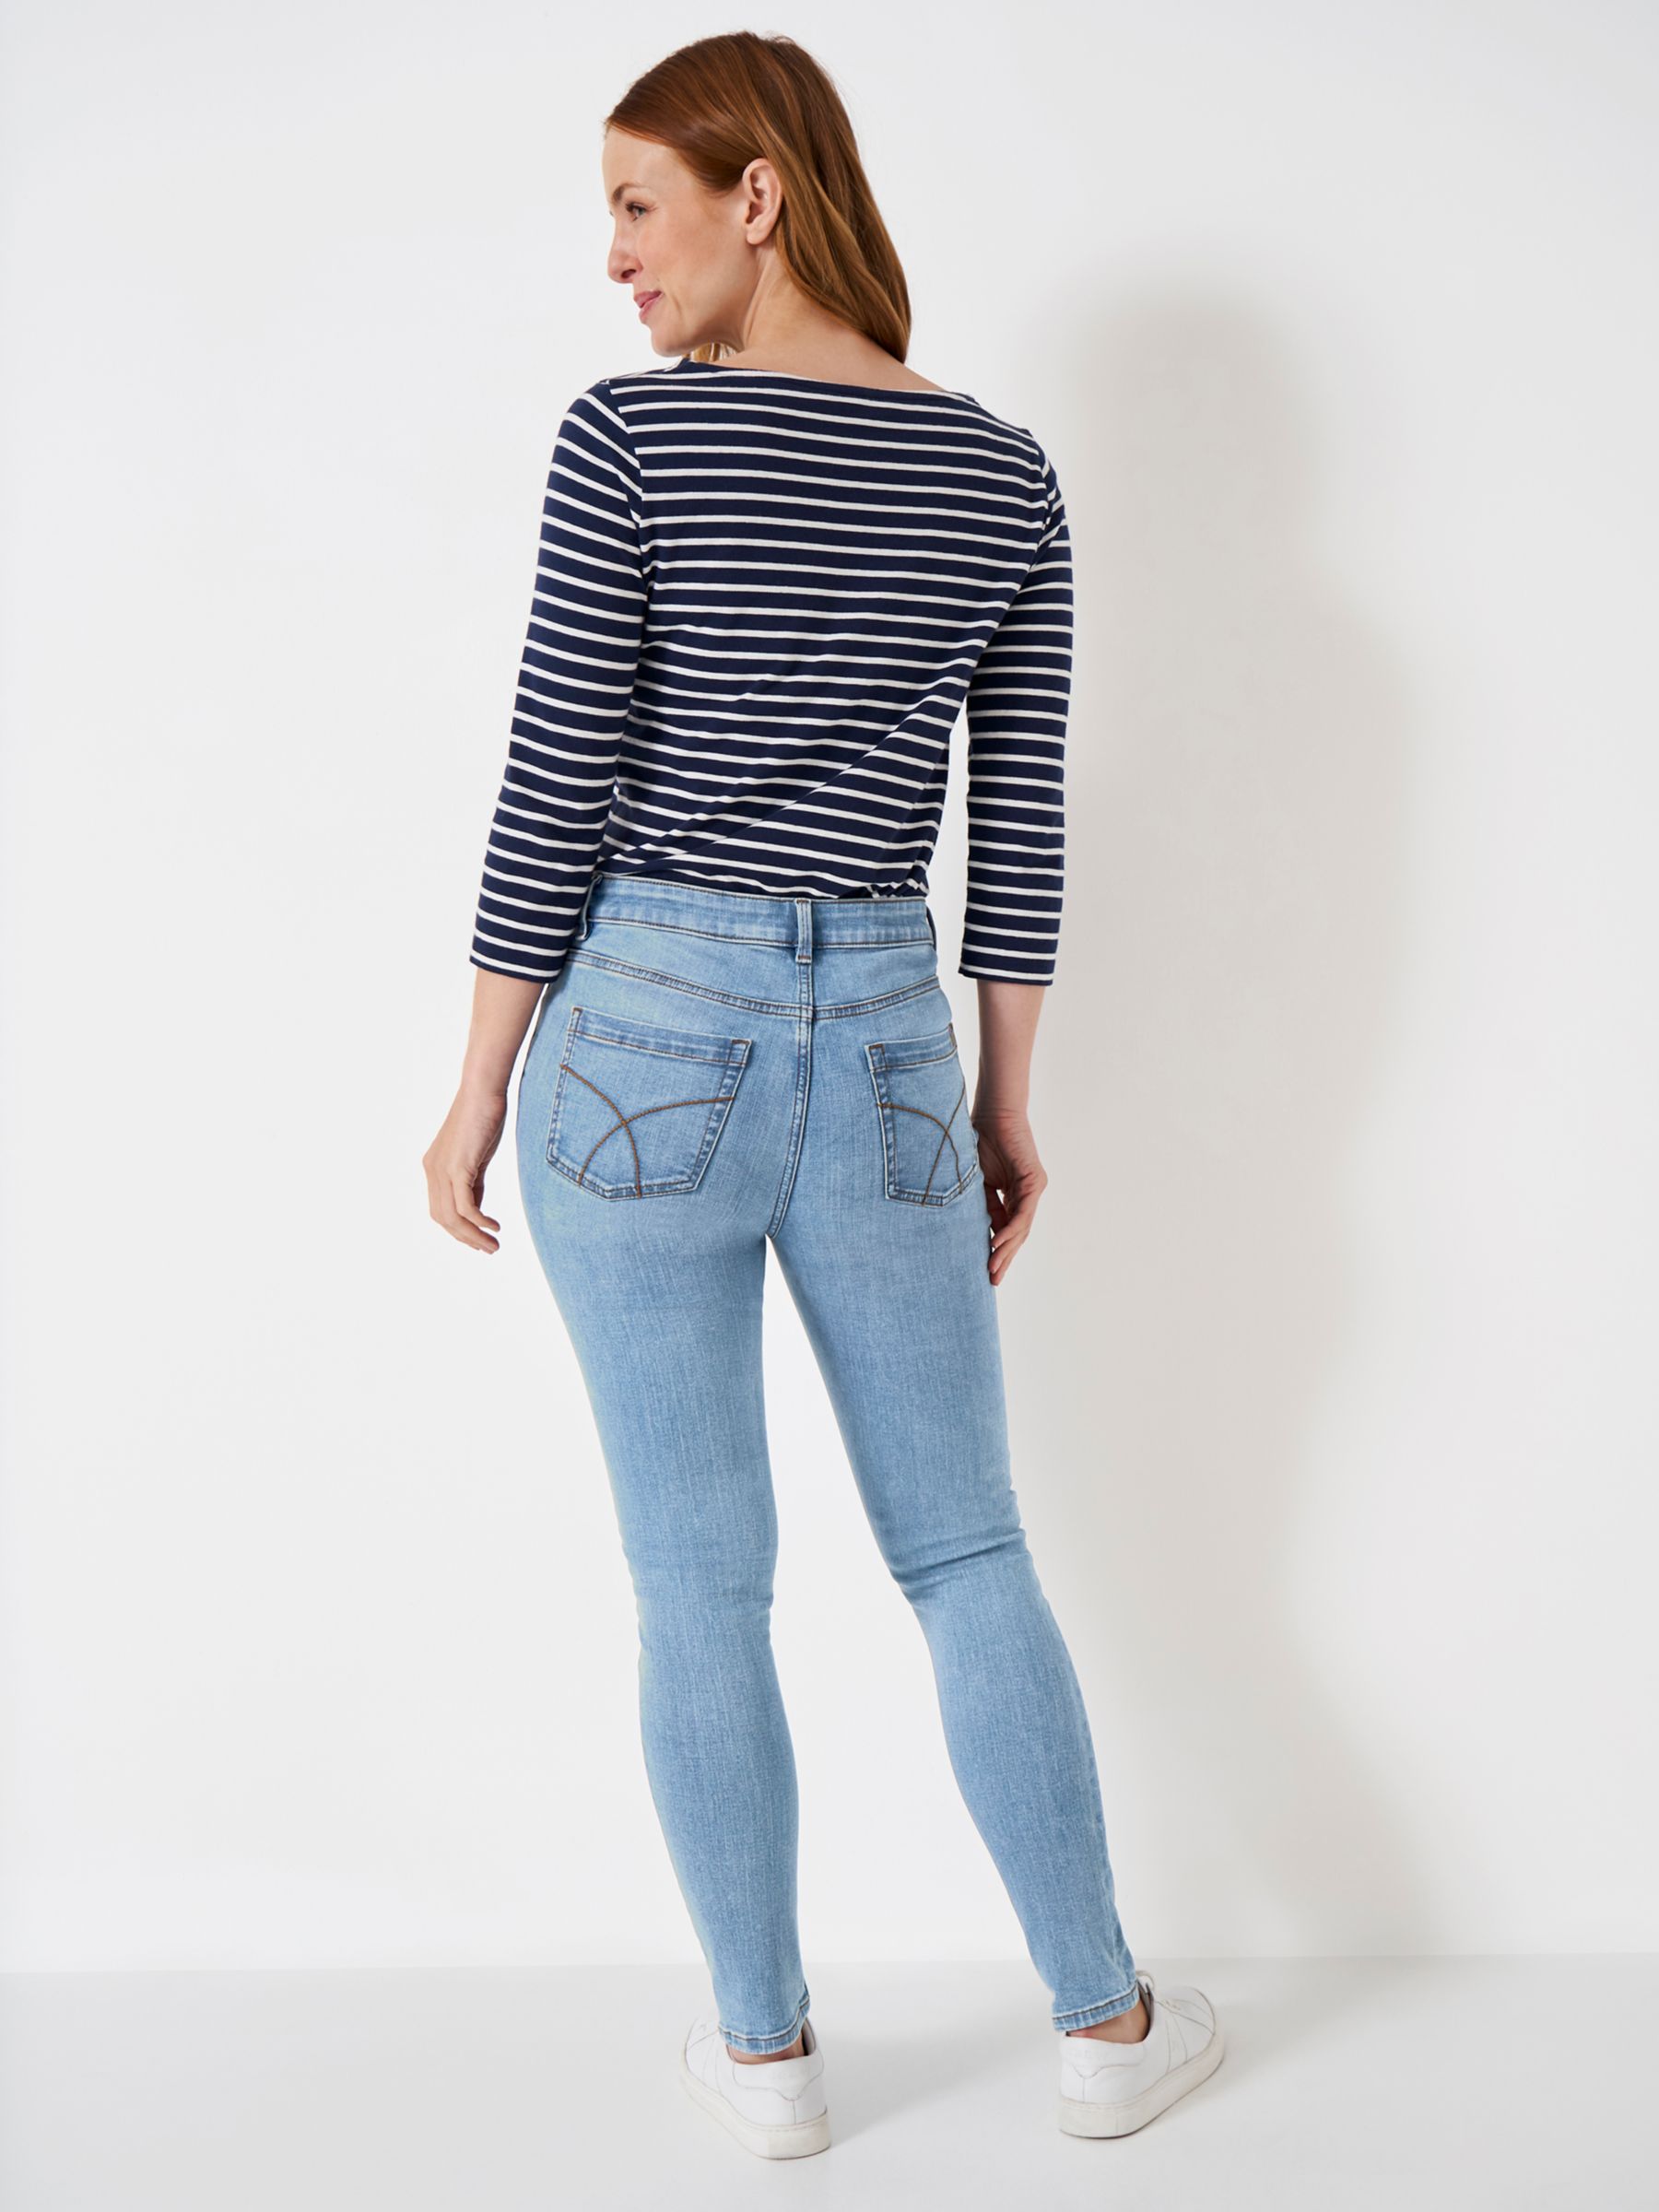 Crew Clothing Skinny Jeans, Light Wash at John Lewis & Partners